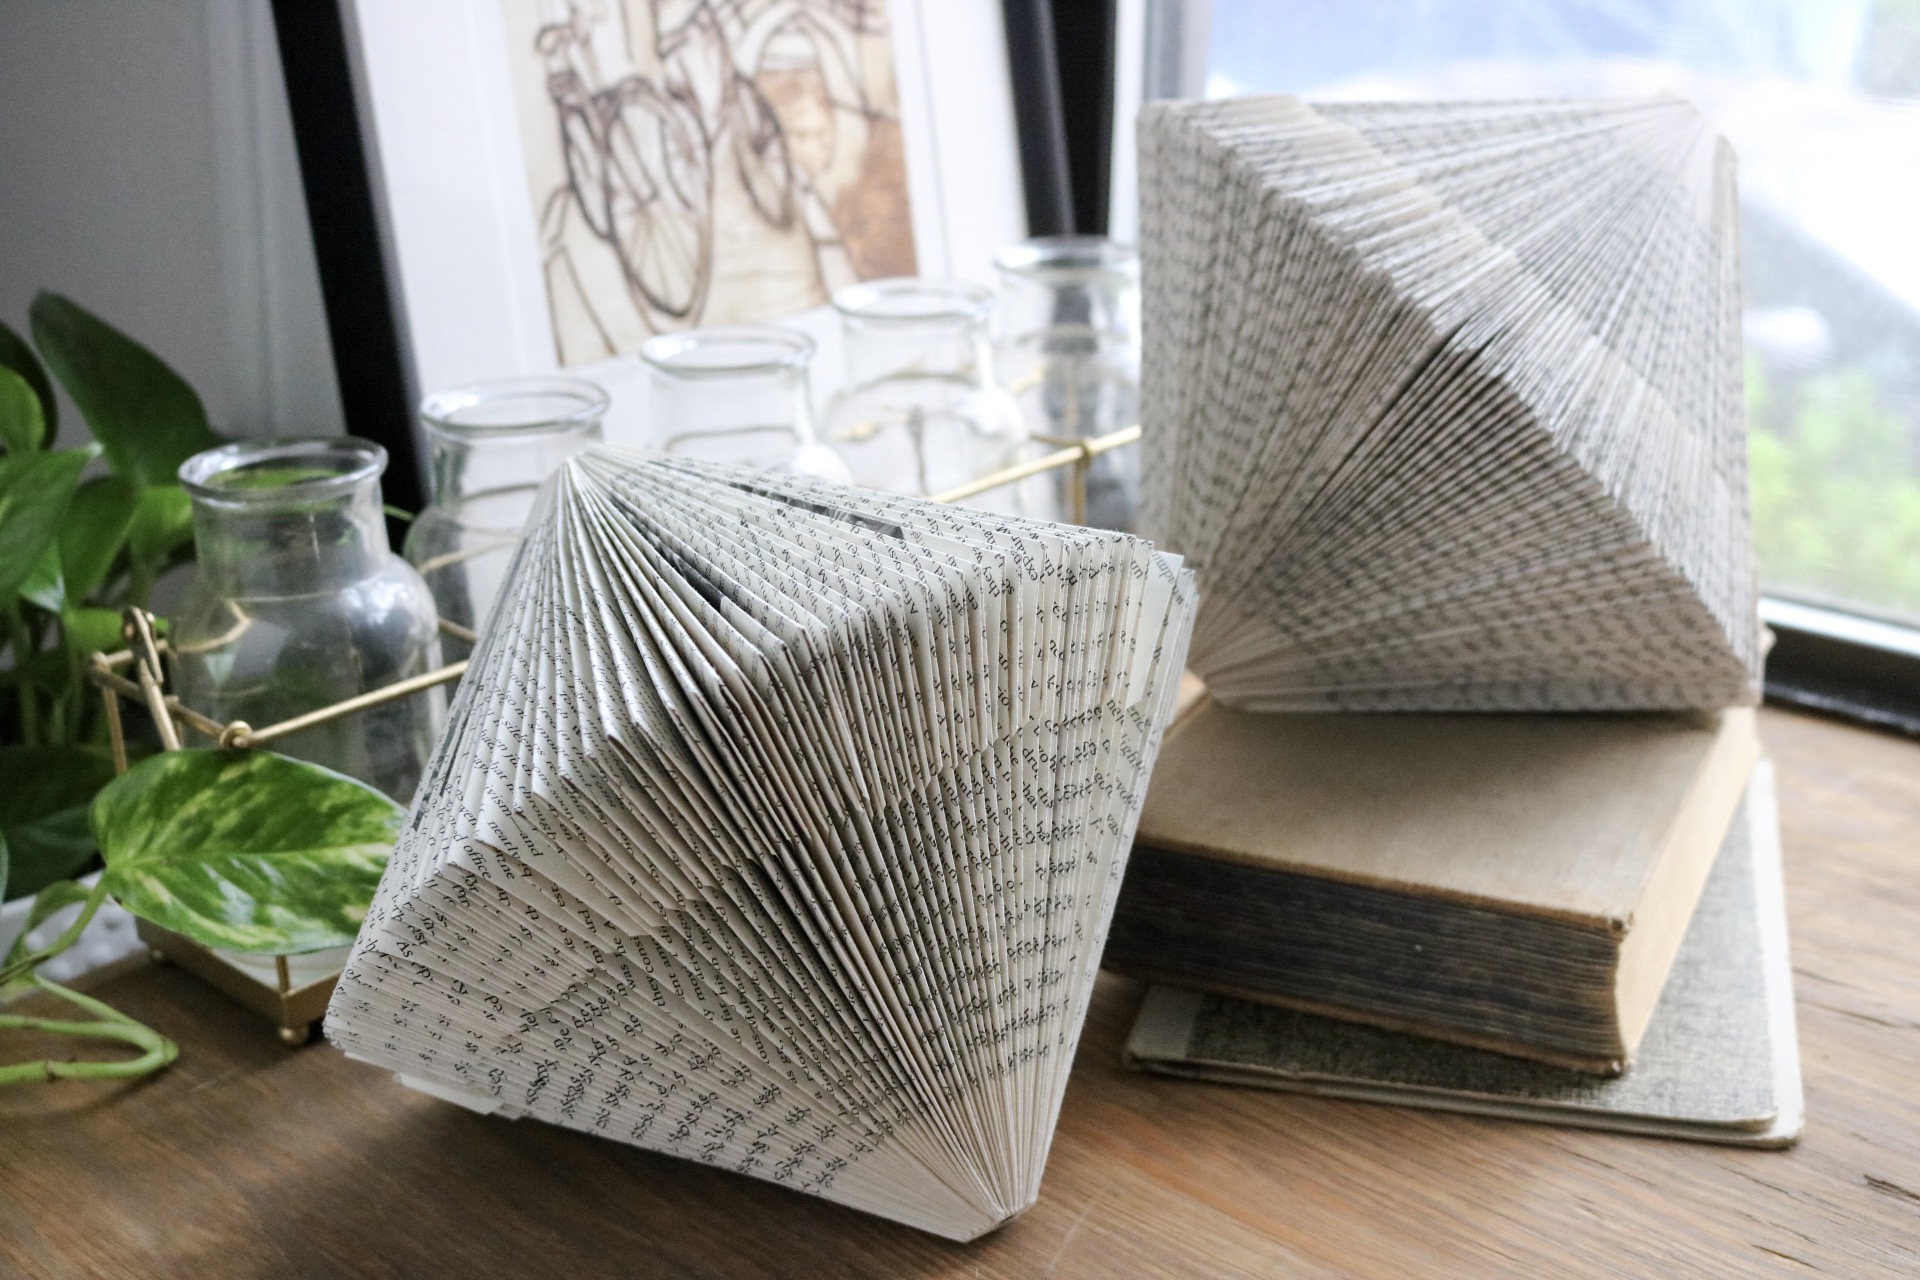 DIY Upcycled Folded Book Sculptures - Take old books or damaged books and turn them into a work or art by creating folded book art paper sculptures!  #falldiy #paper #bookworm #homedecor #falldecor #backtoschool #origami #papersculpture